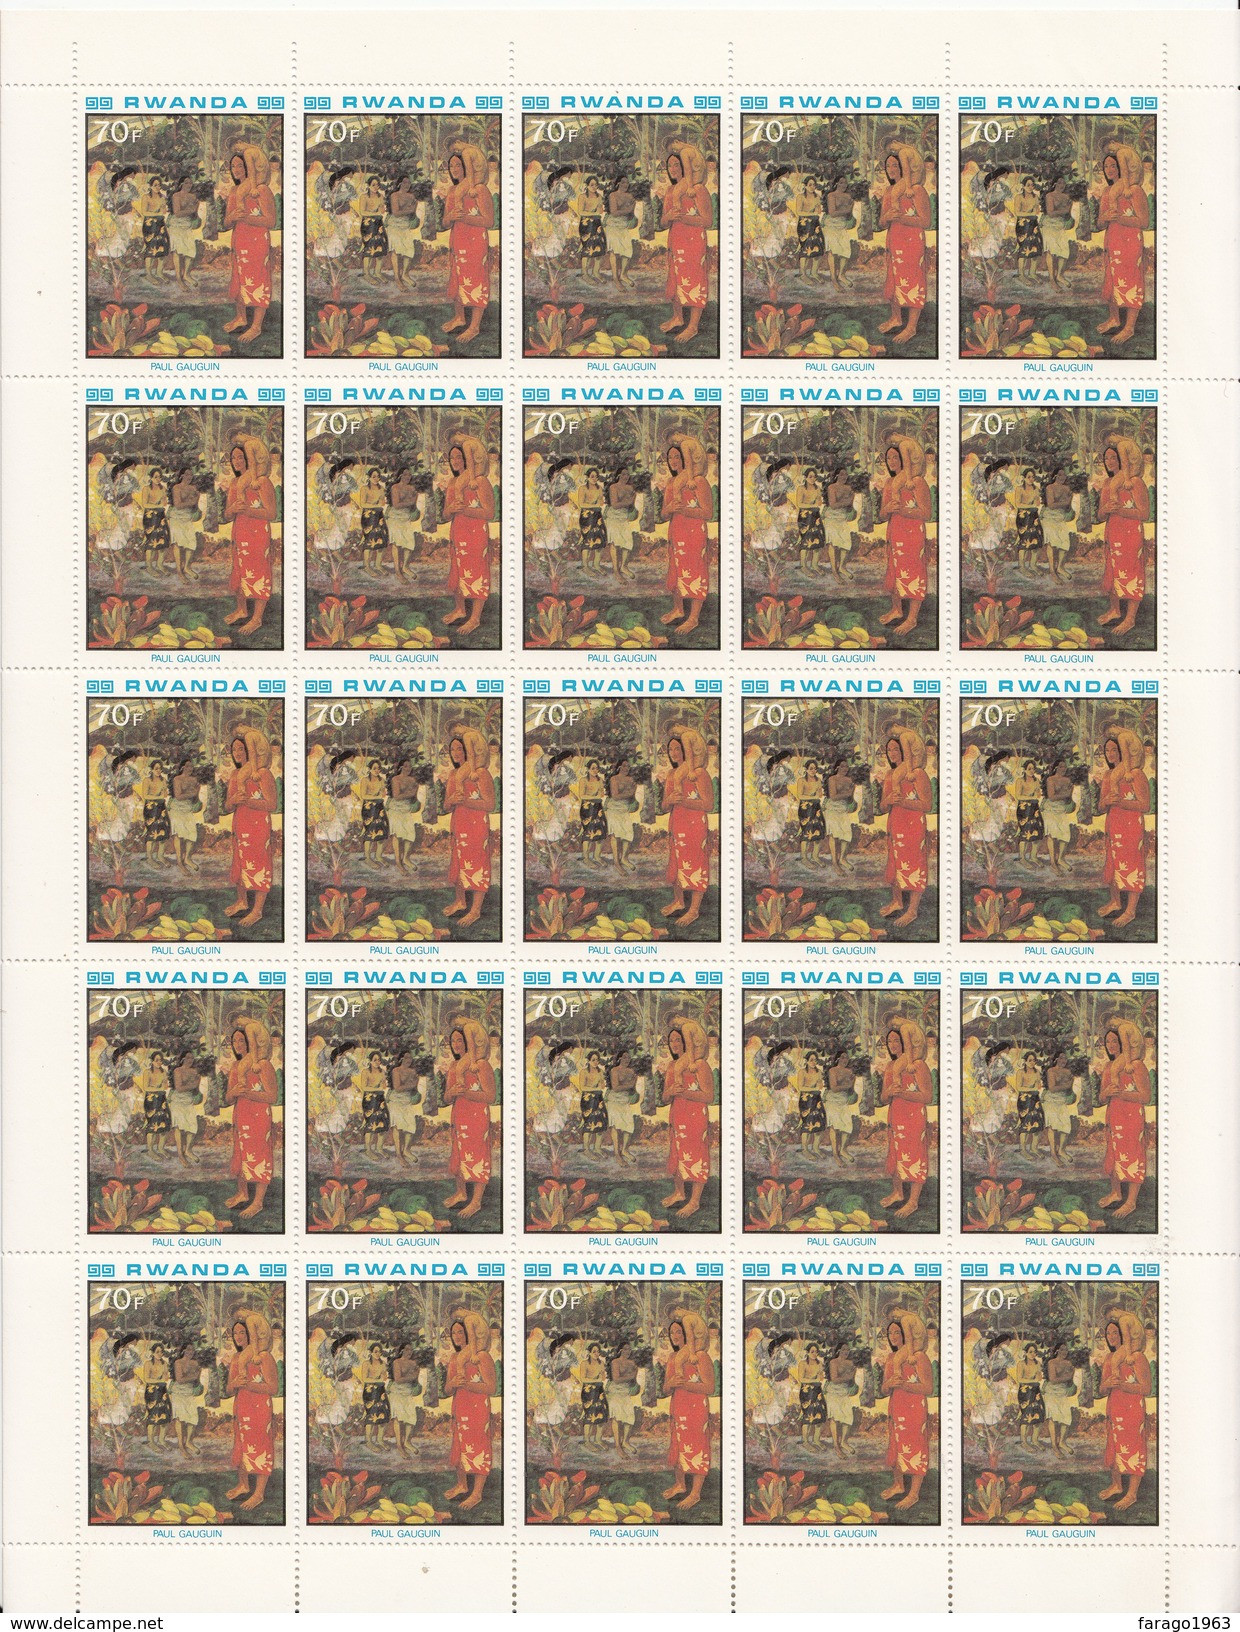 1980 Rwanda 70F Gauguin "Tahaitian Women" Painting Complete Sheet Of 25 MNH  SUPER CHEAP Not In Every Collection - Impressionisme